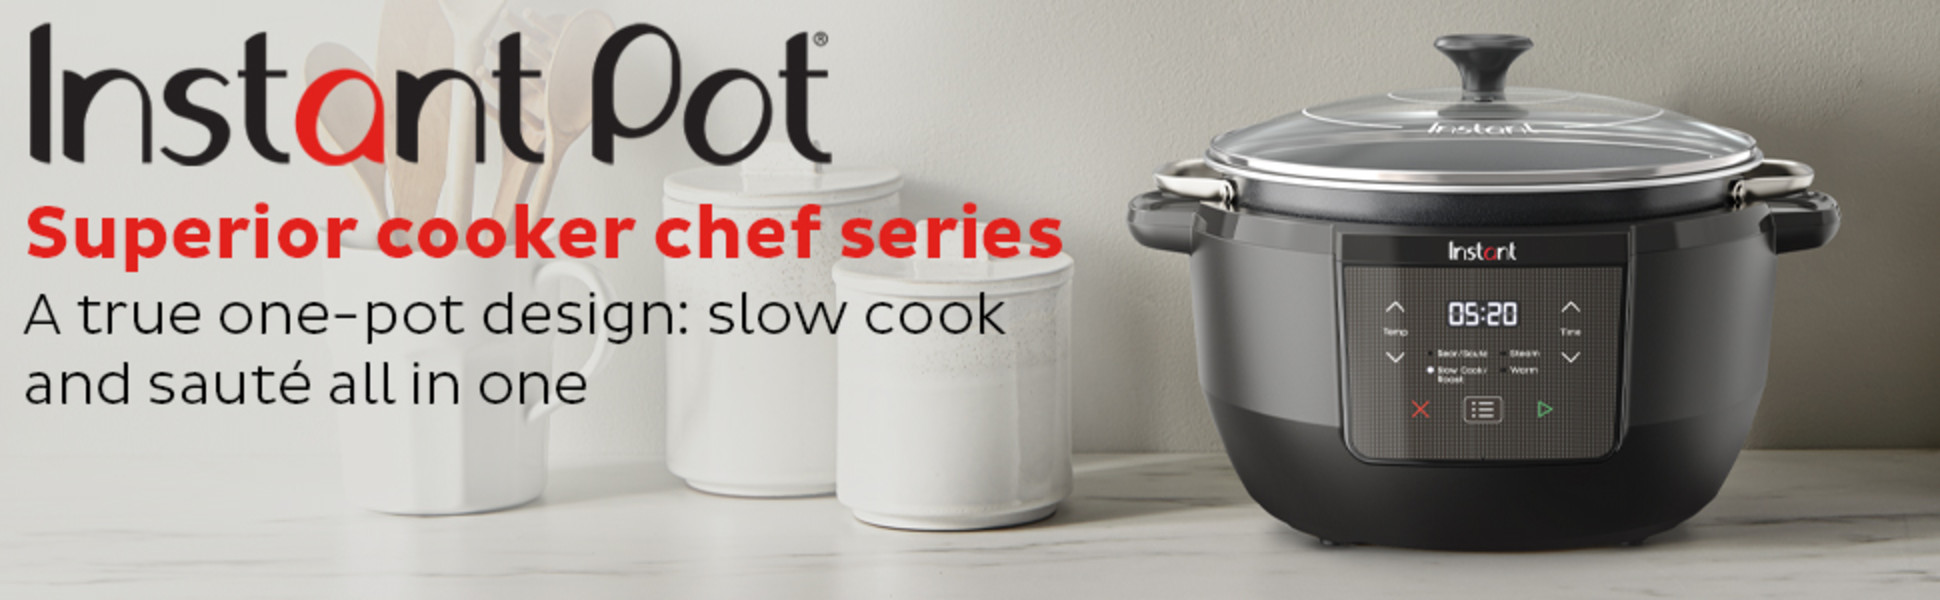 Instant Superior Cooker Chef Series 7.5 Qt Slow Cooker and